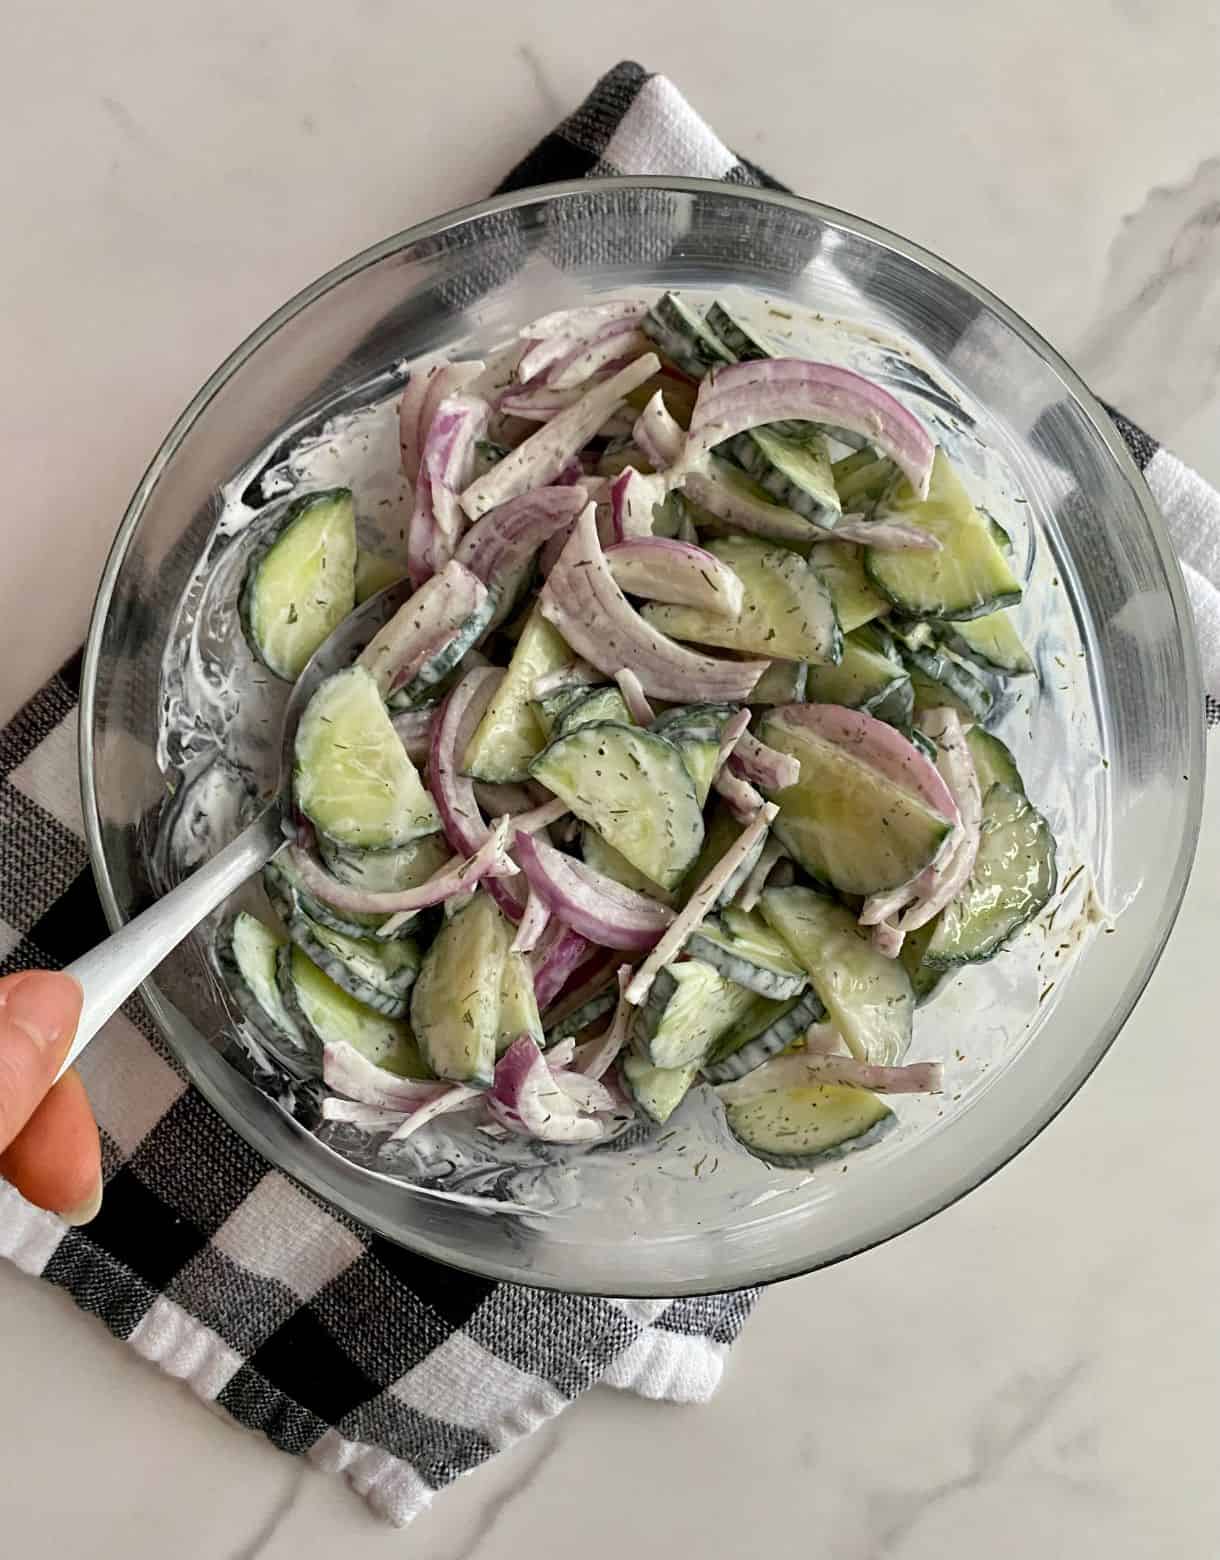 A bowl of Creamy Cucumber and Onion Salad on a checkered kitchen towel.